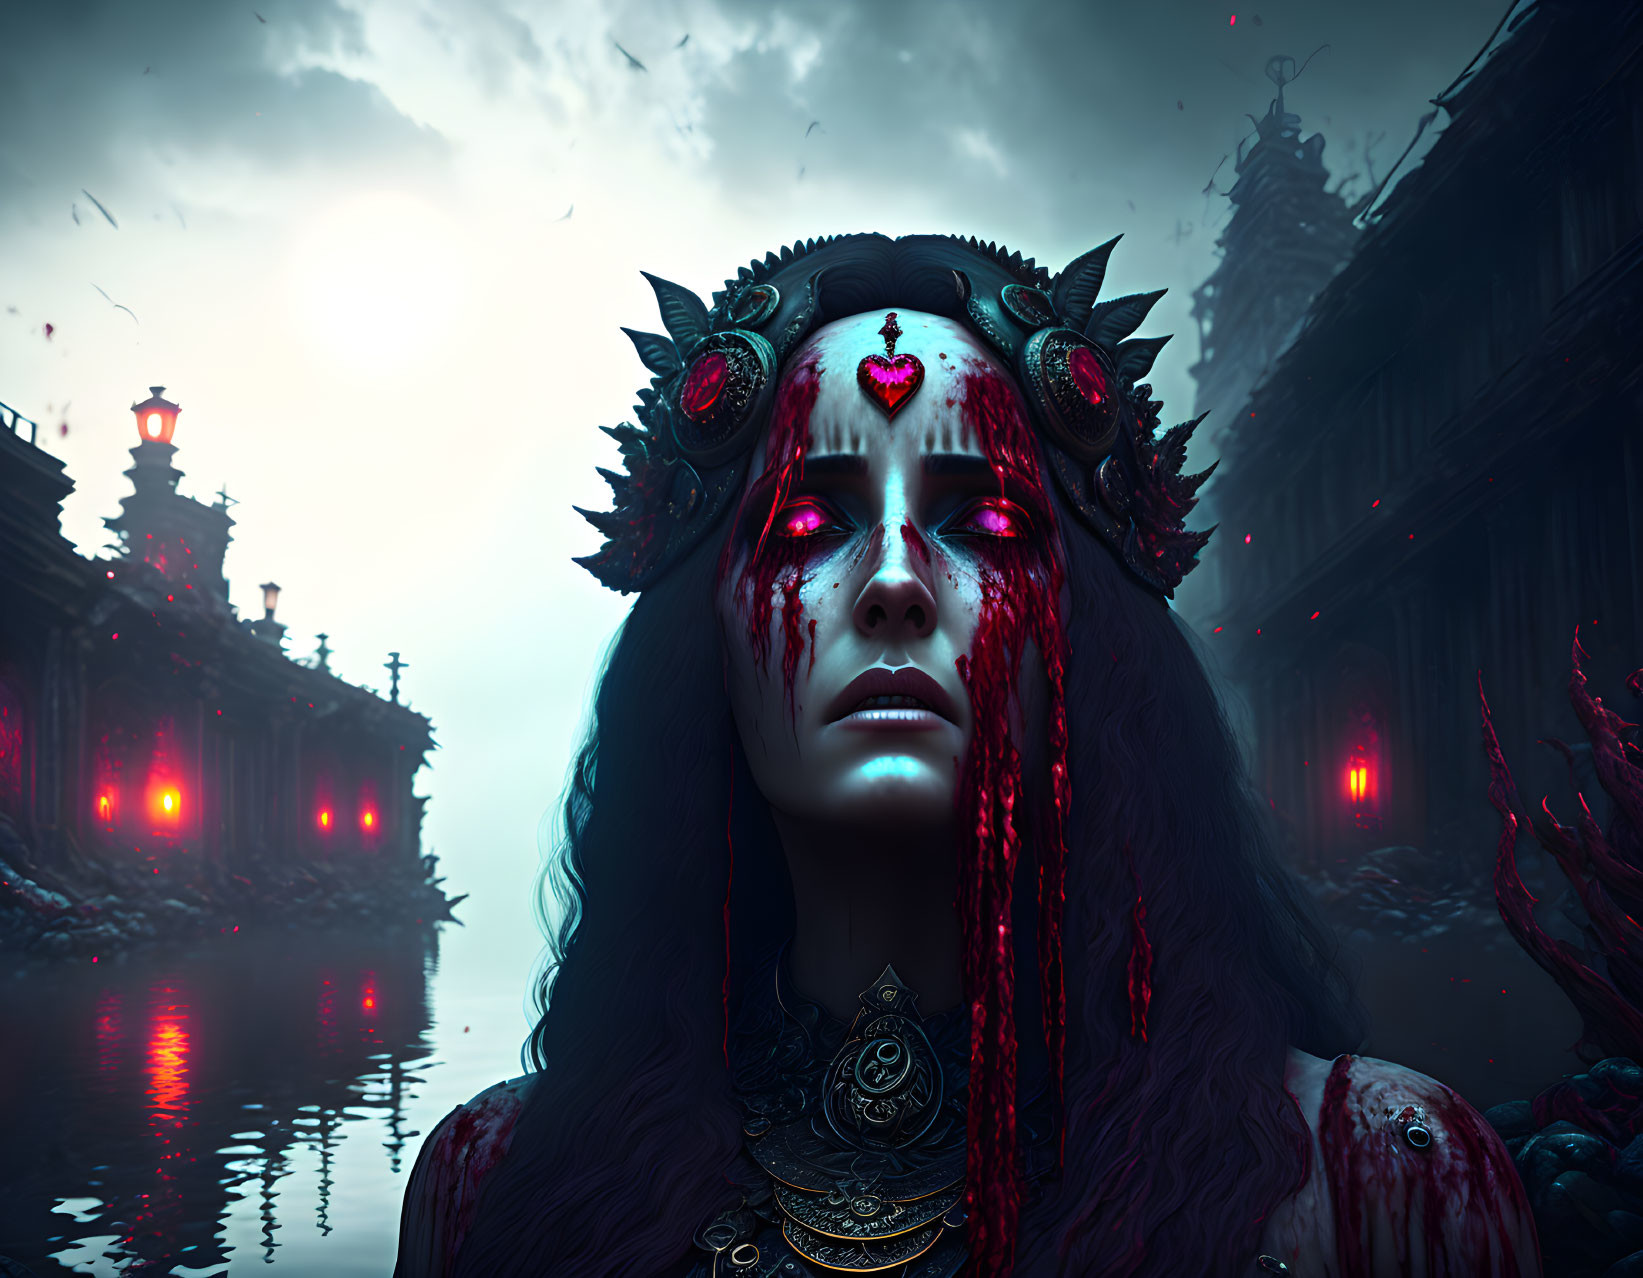 Pale-skinned female with red eyes in dark headgear and blood-like streams, set against gothic